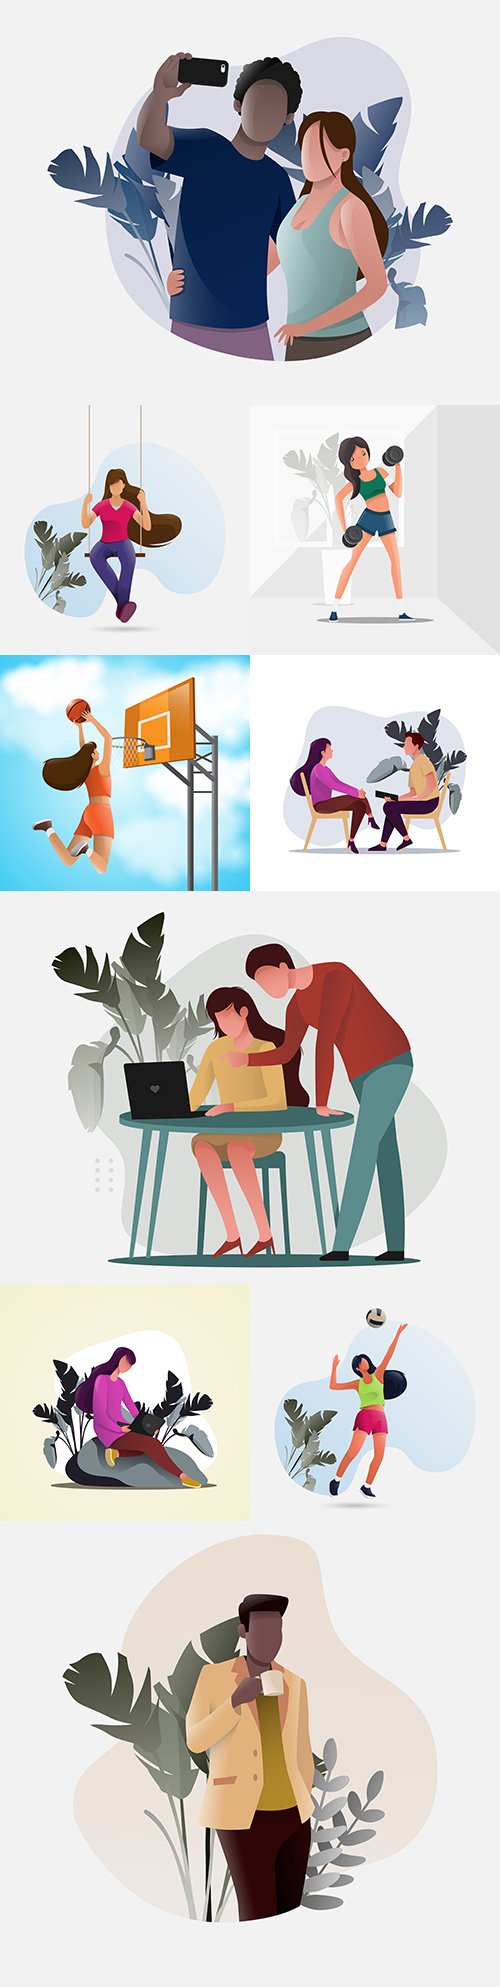 Healthy lifestyle and self-insulation people in flat design